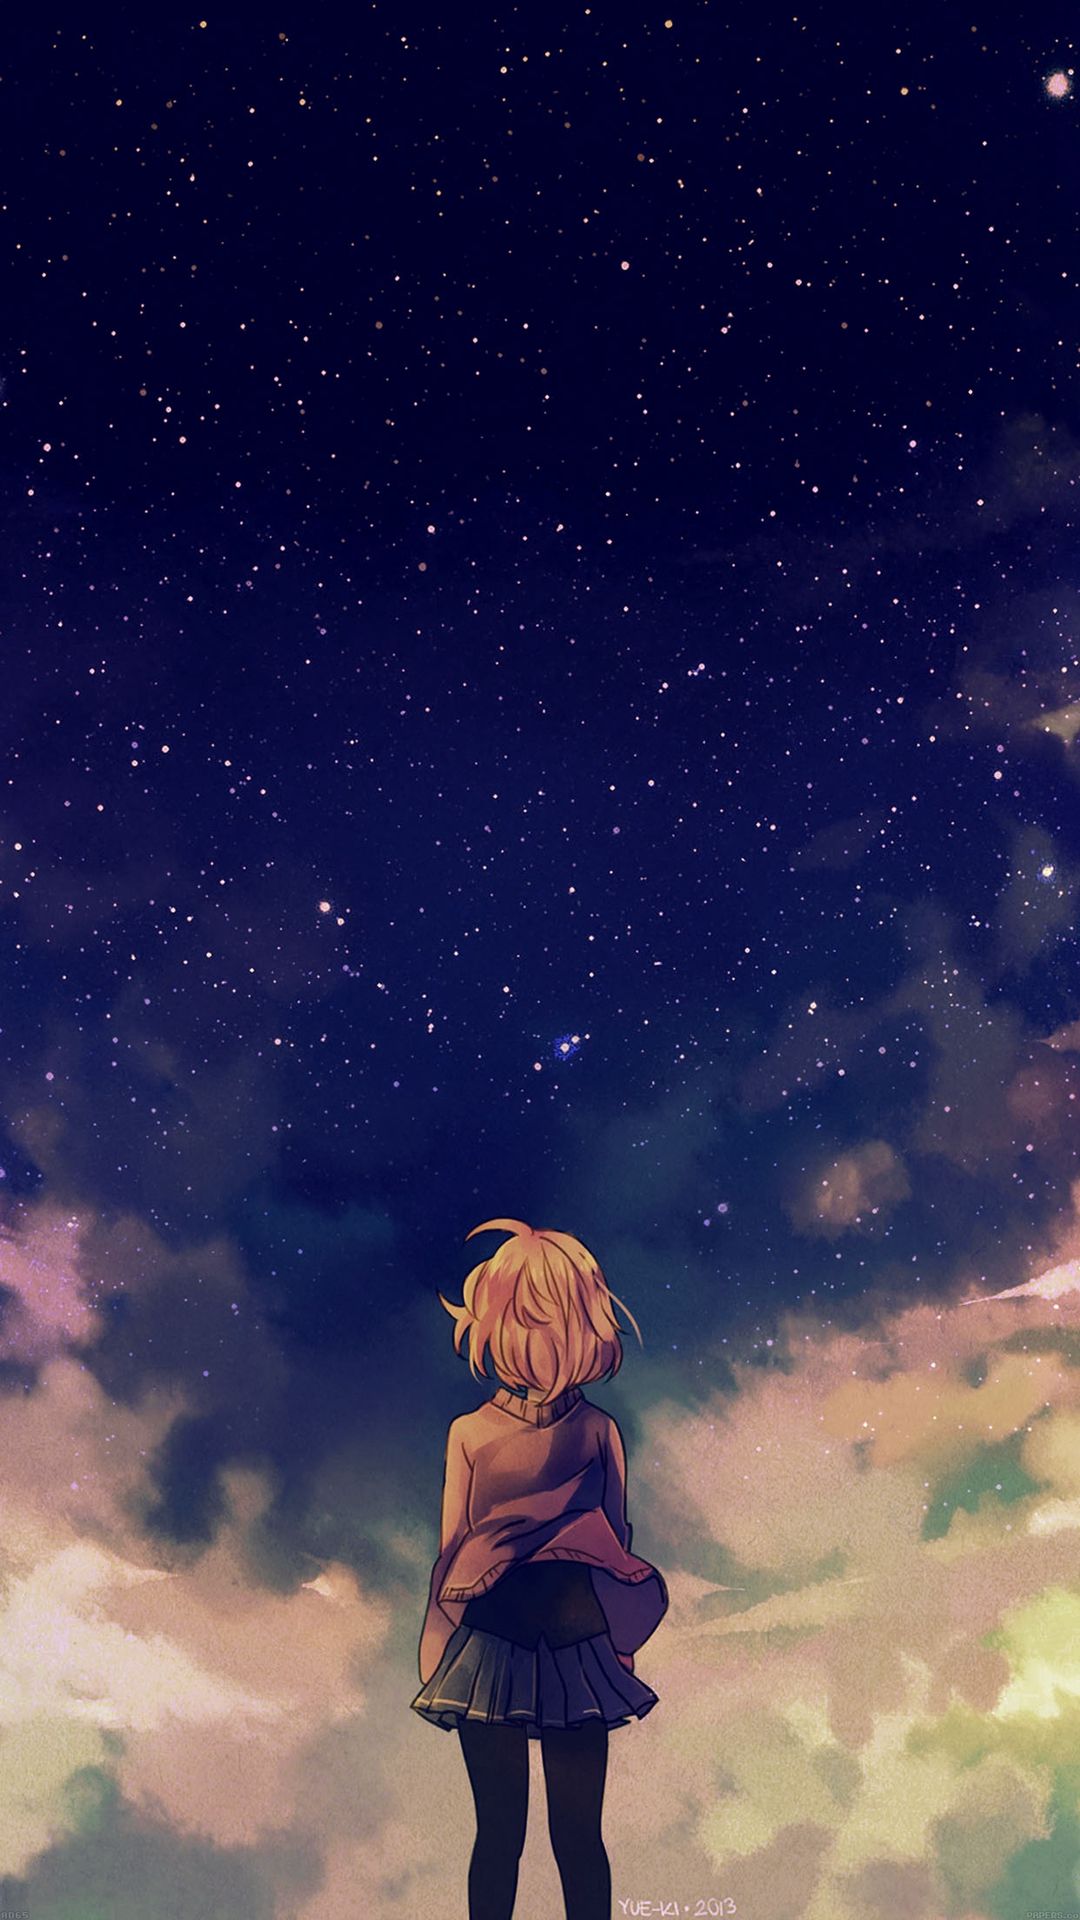 Download Side Profile Cute Anime Girl iPhone Wallpaper | Wallpapers.com